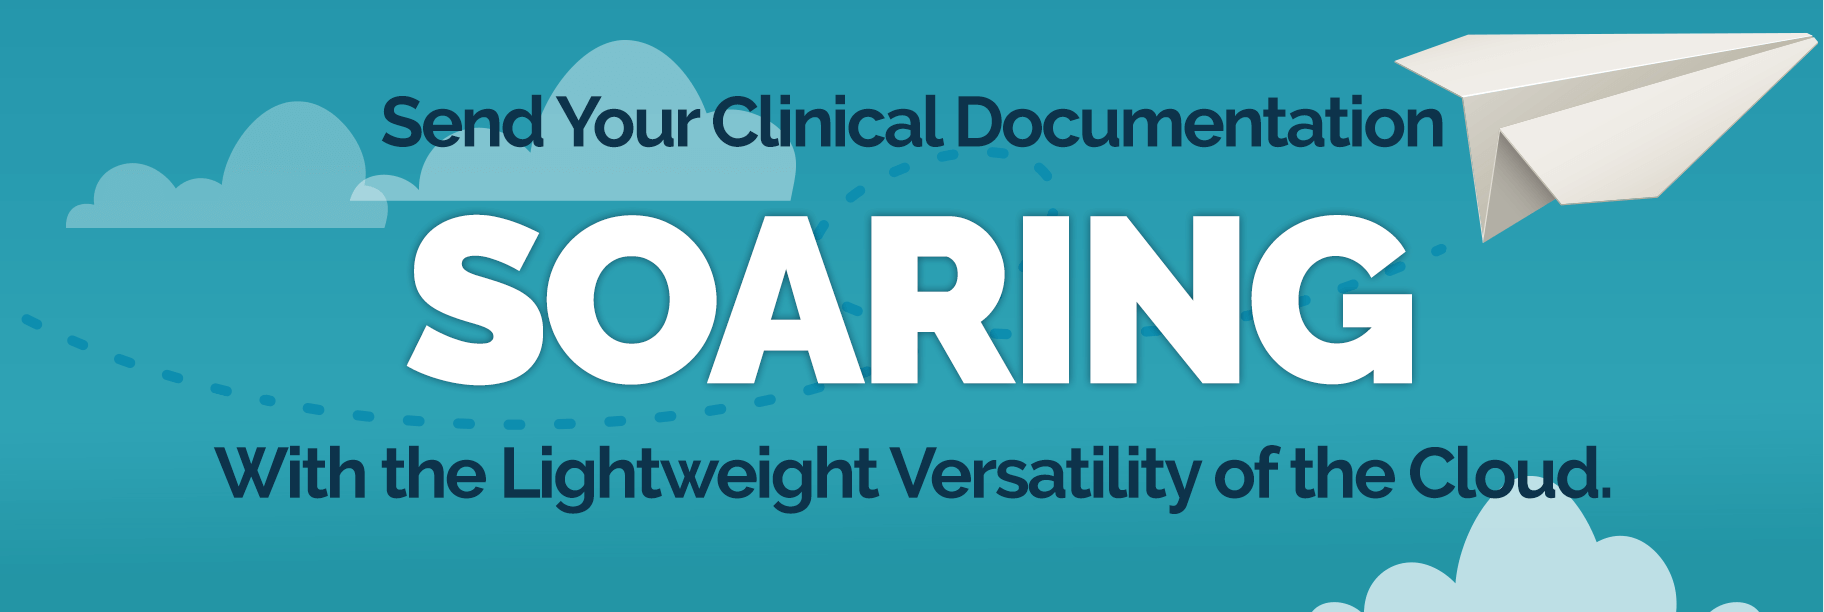 Send your clinical documentation soaring with the lightweight versatility of the cloud.